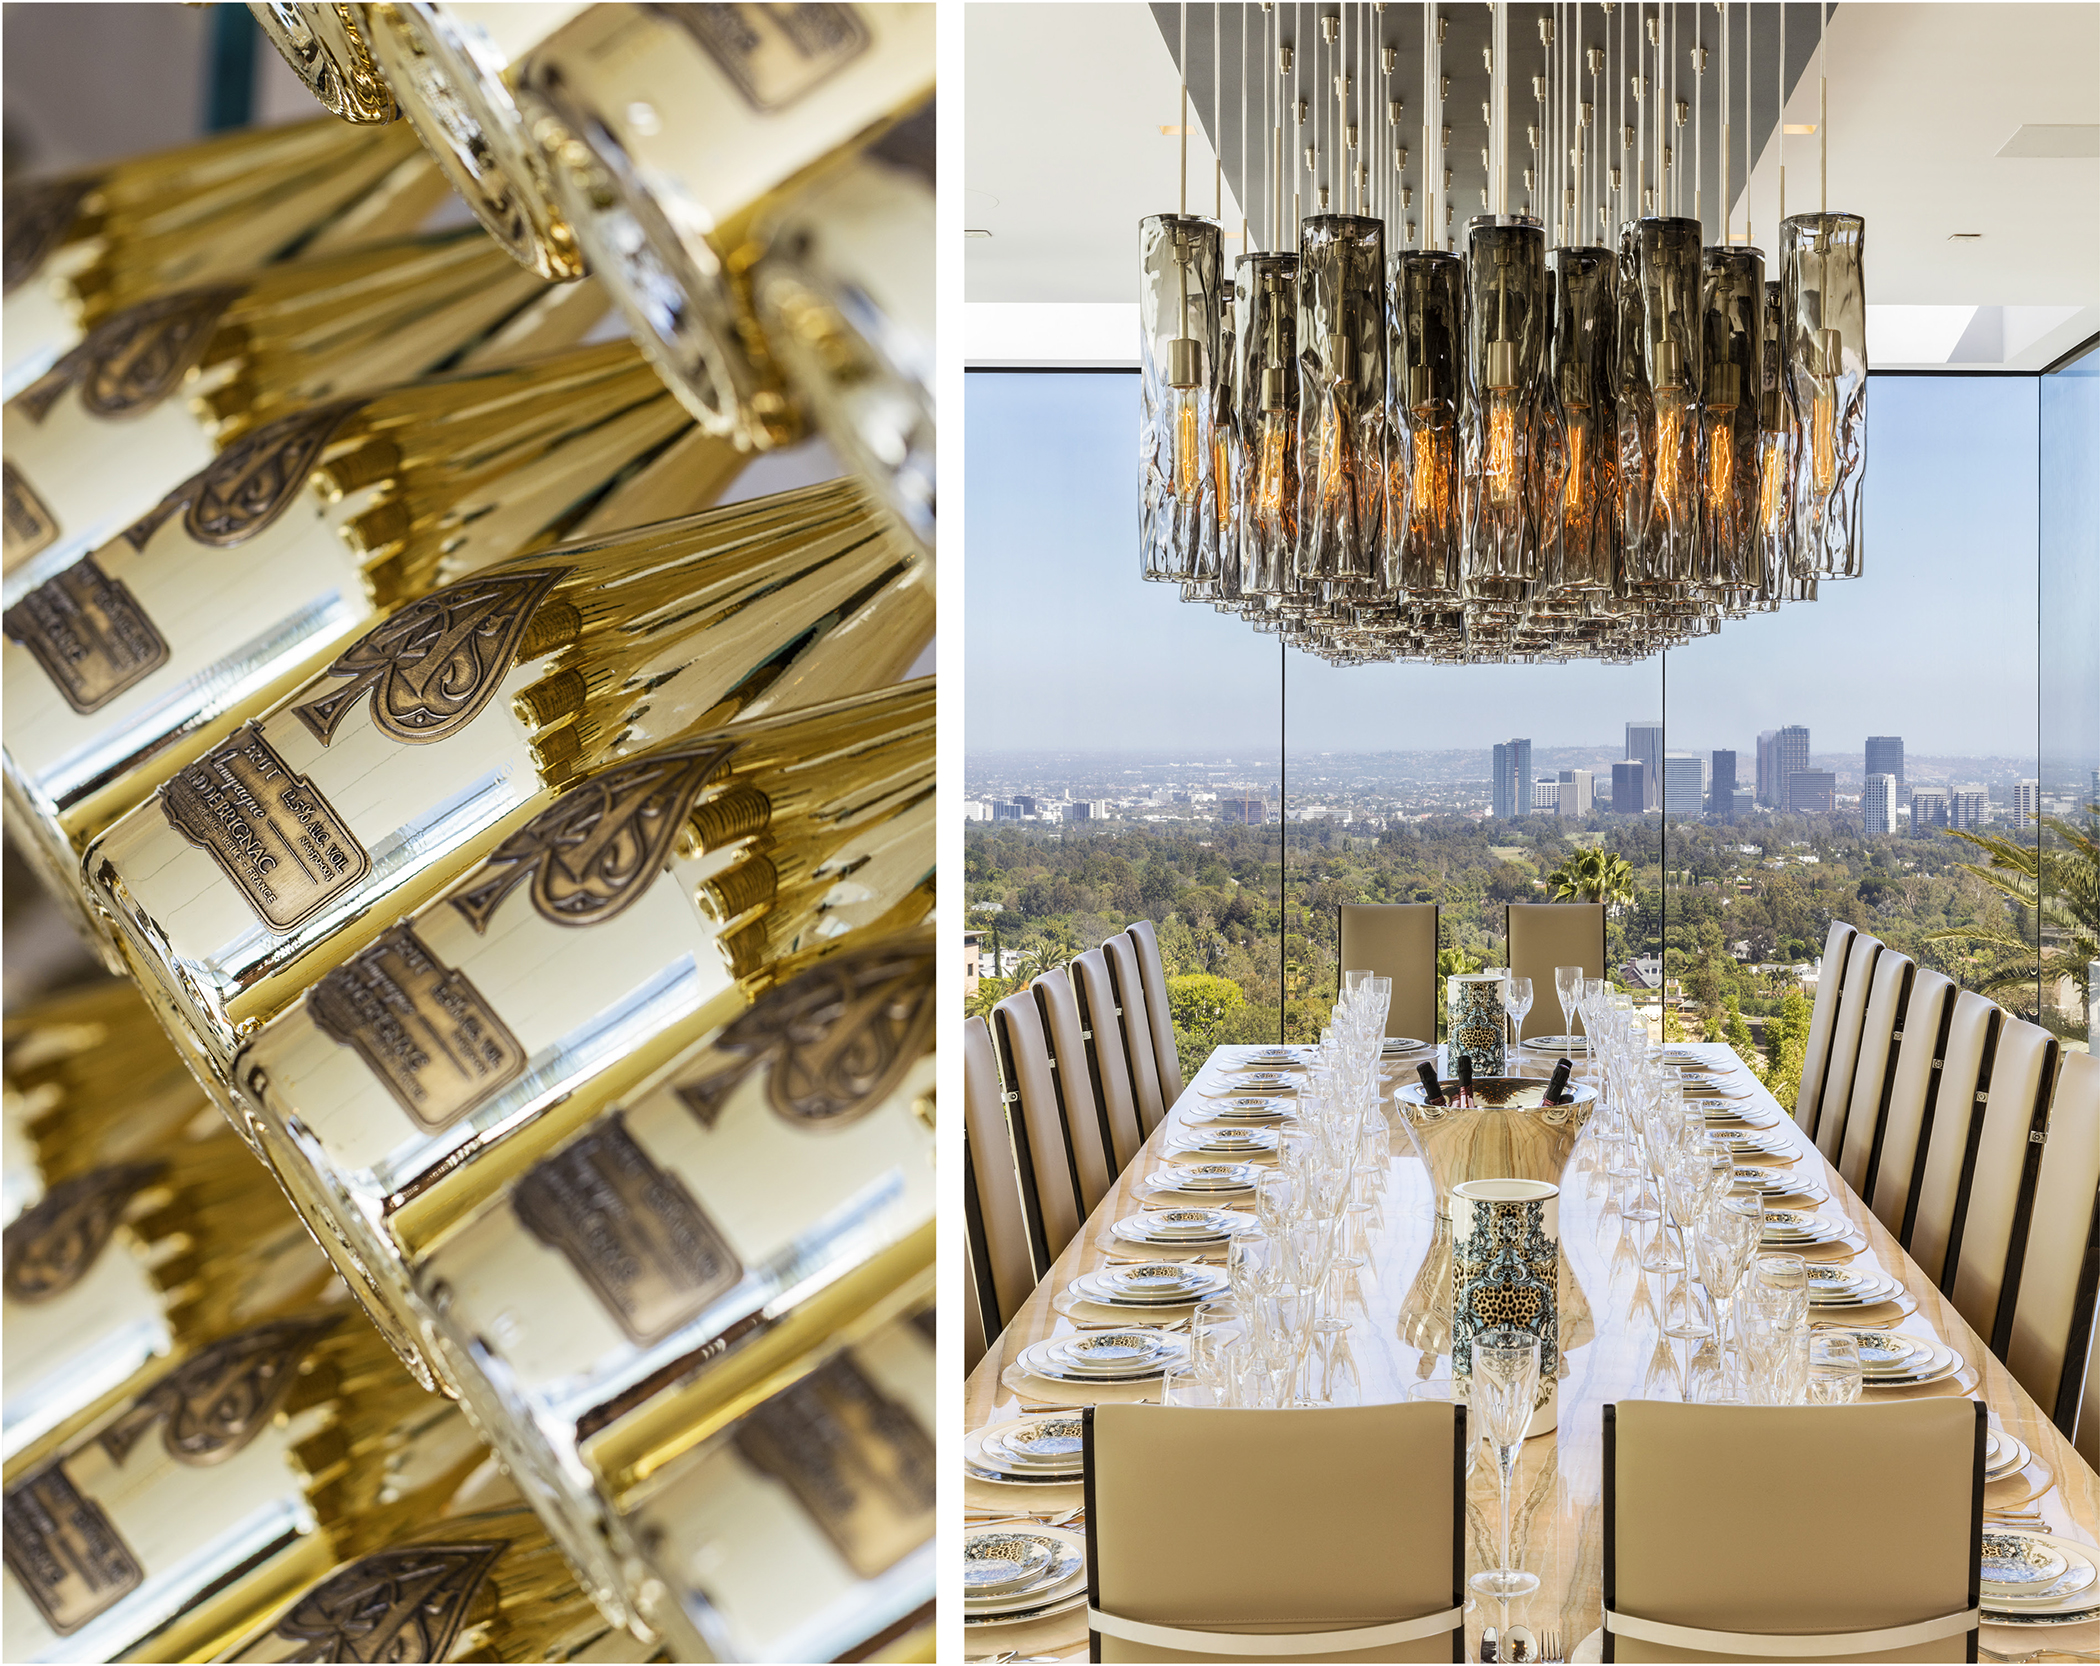 $250 Million Bel Air Home Champagne Collection and Formal Dining Room